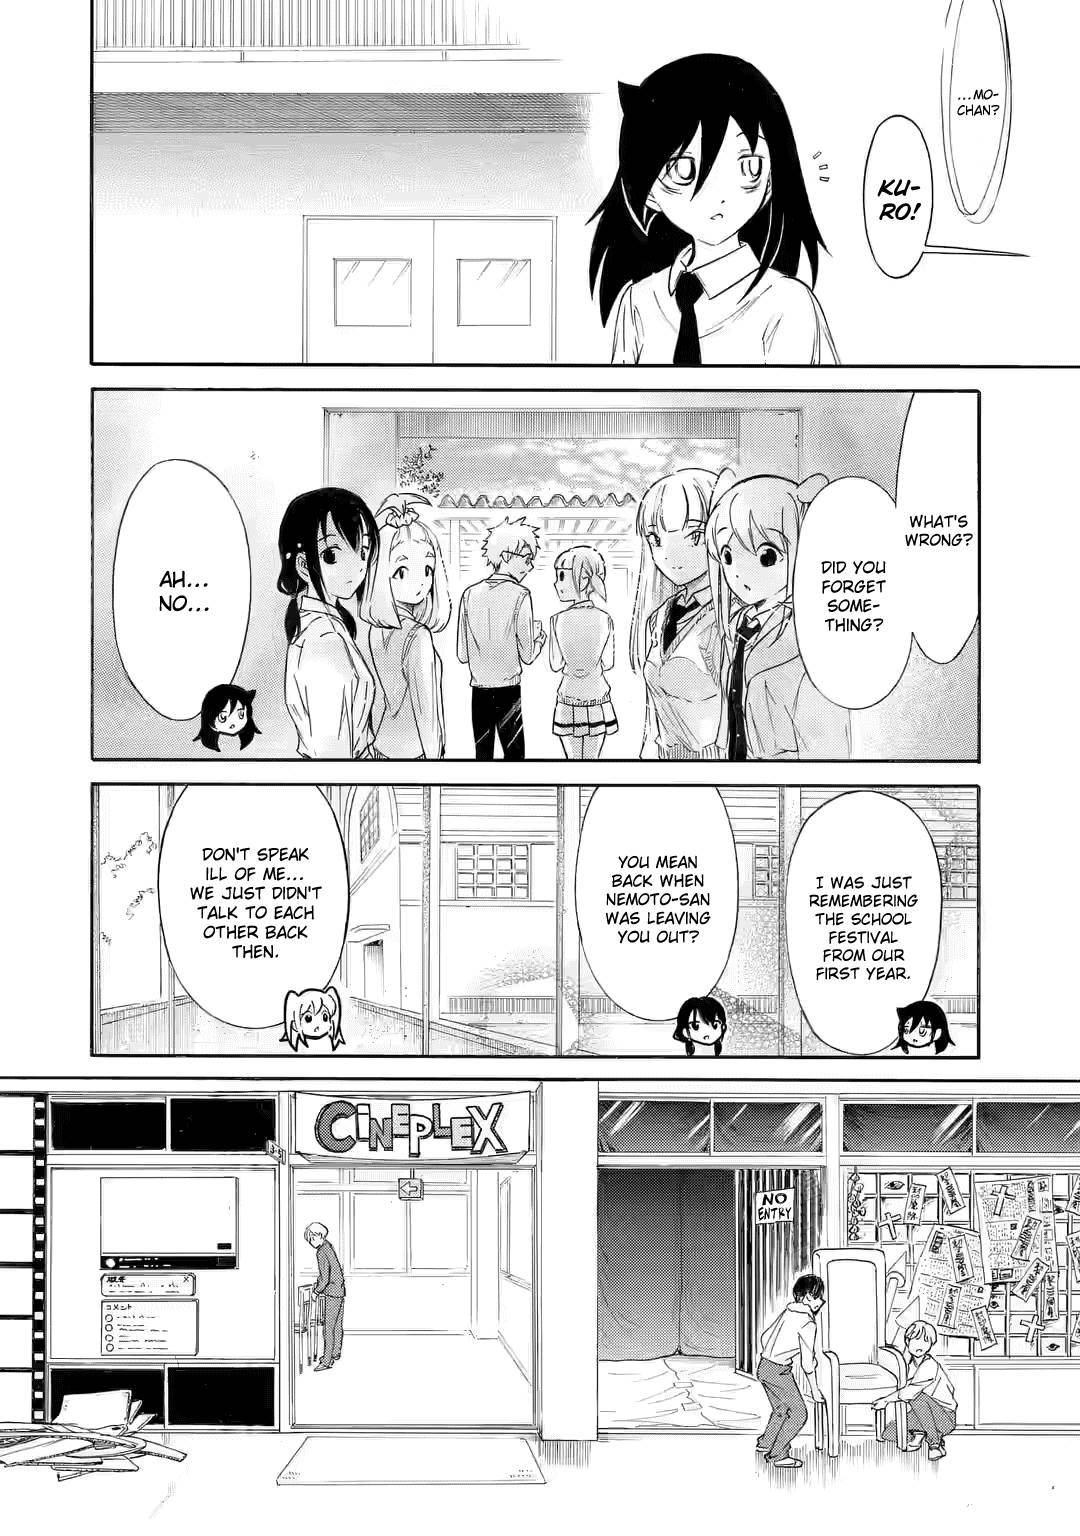 It's Not My Fault That I'm Not Popular! - chapter 213.3 - #5